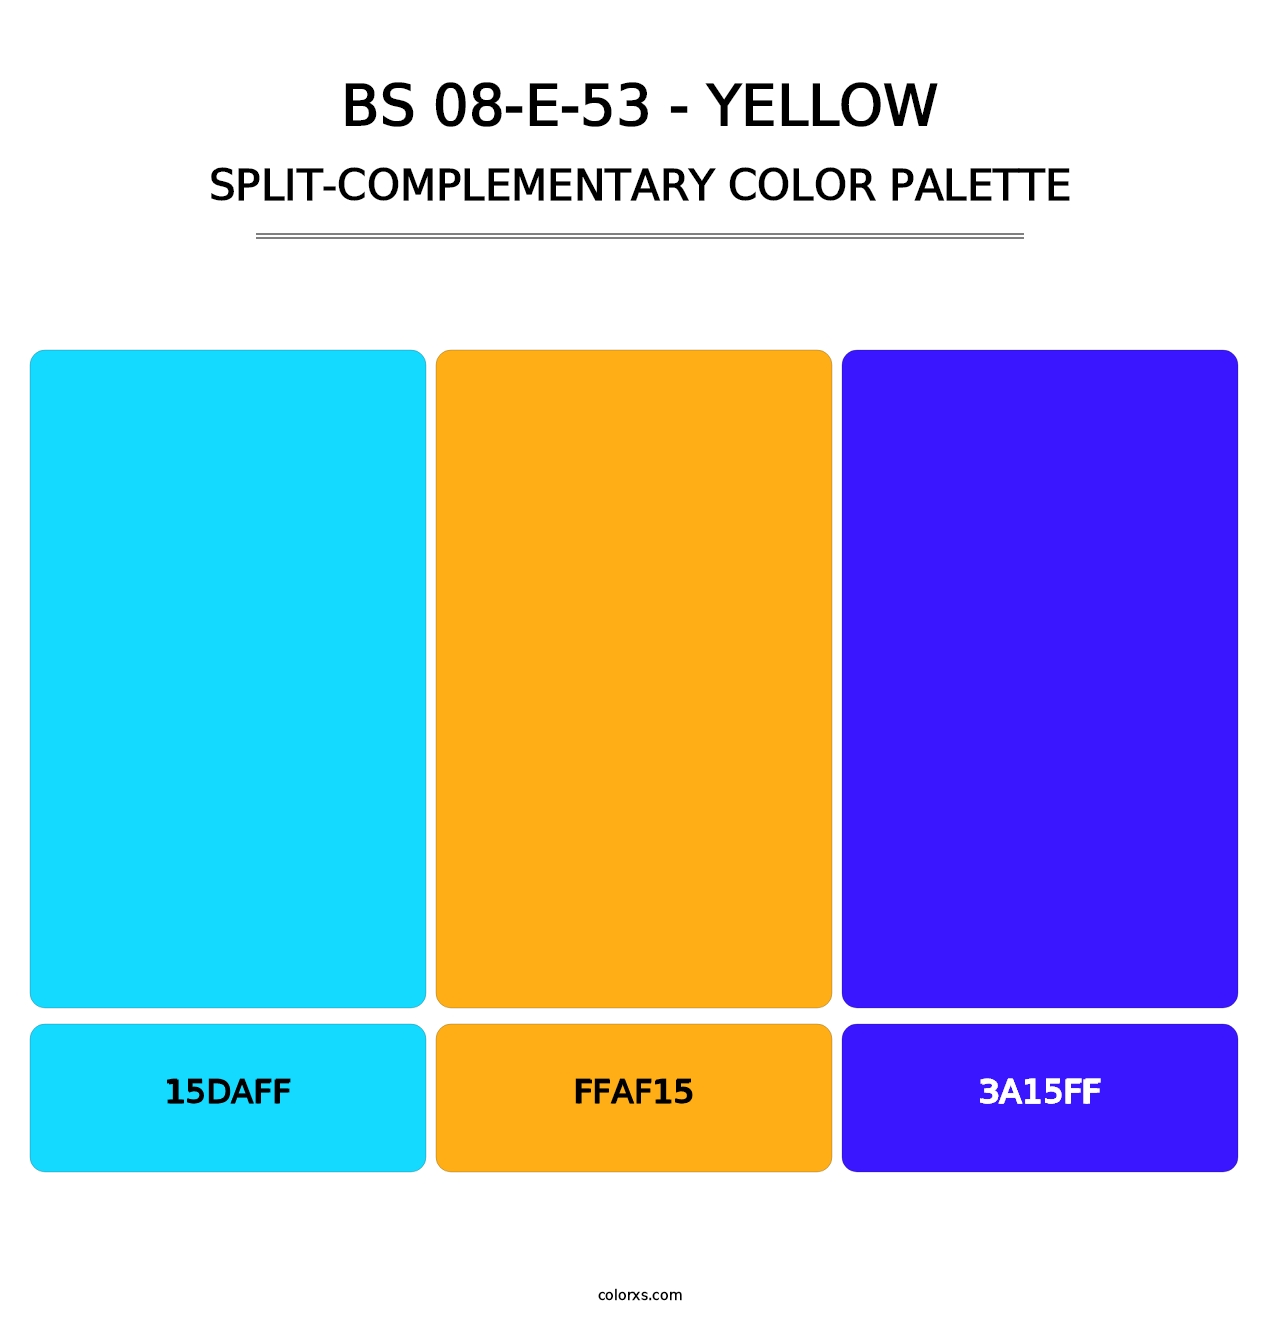 BS 08-E-53 - Yellow - Split-Complementary Color Palette